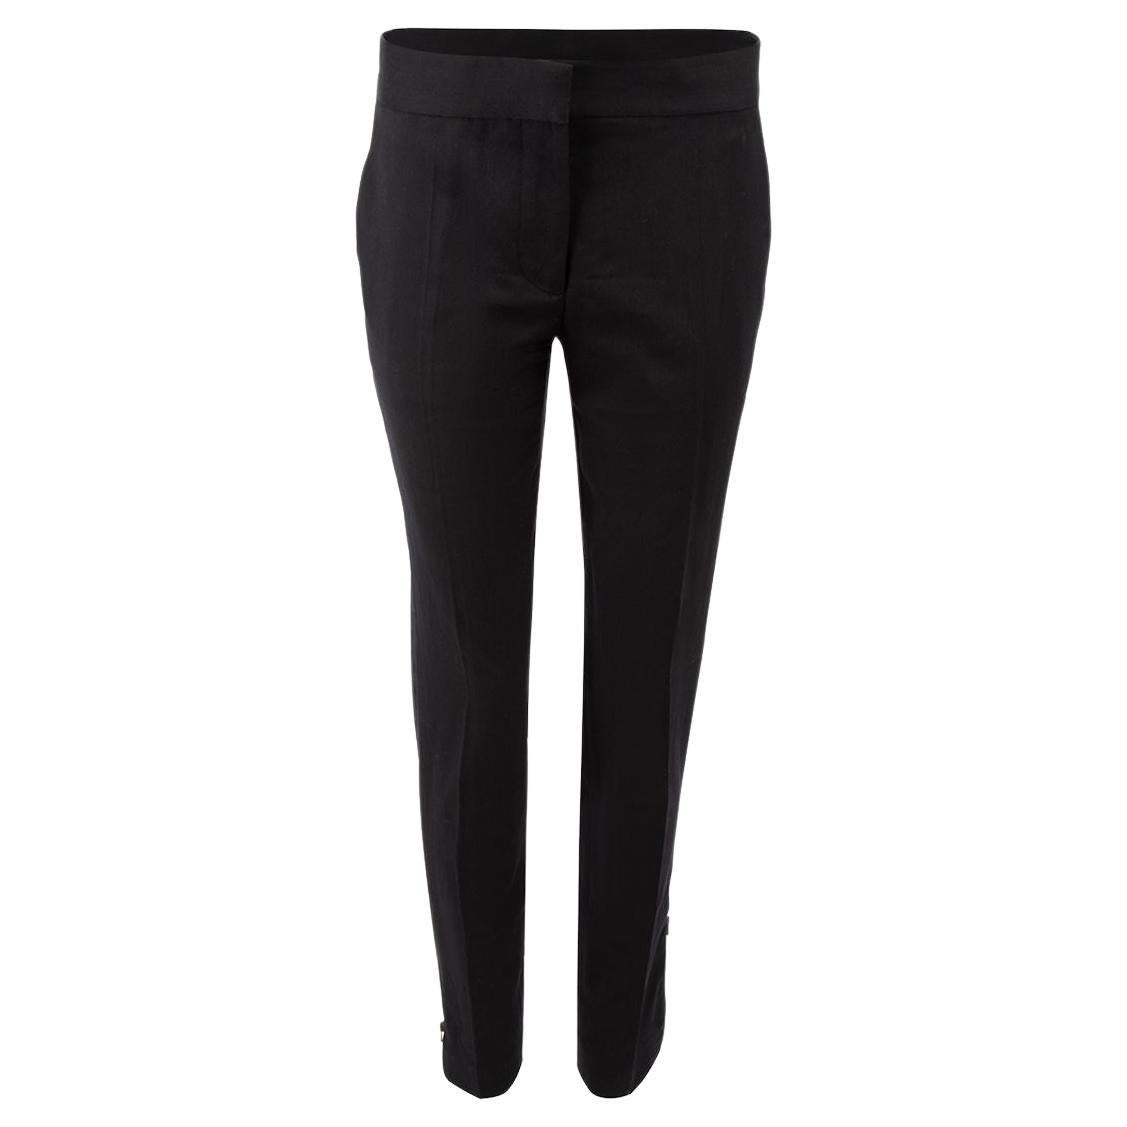 Stella McCartney Women's Black Slim Fit Trousers with Zip Details For Sale